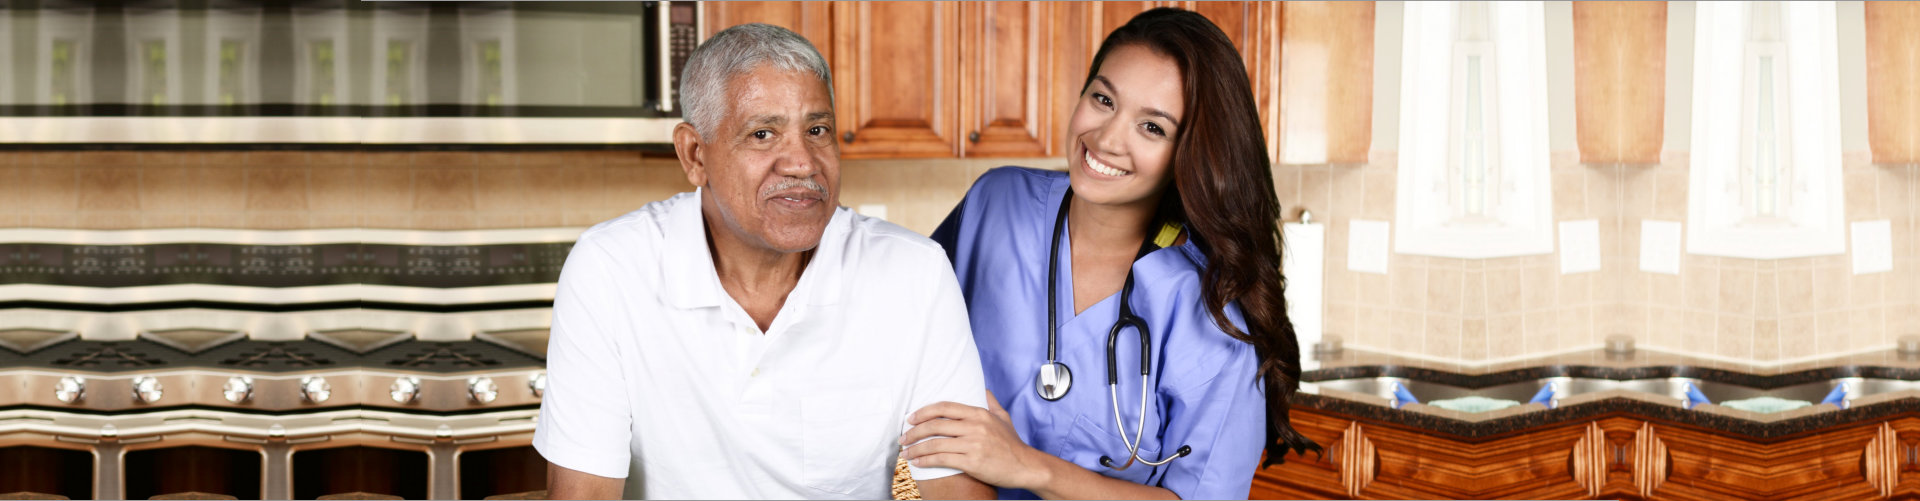 Home health care worker and an elderly man